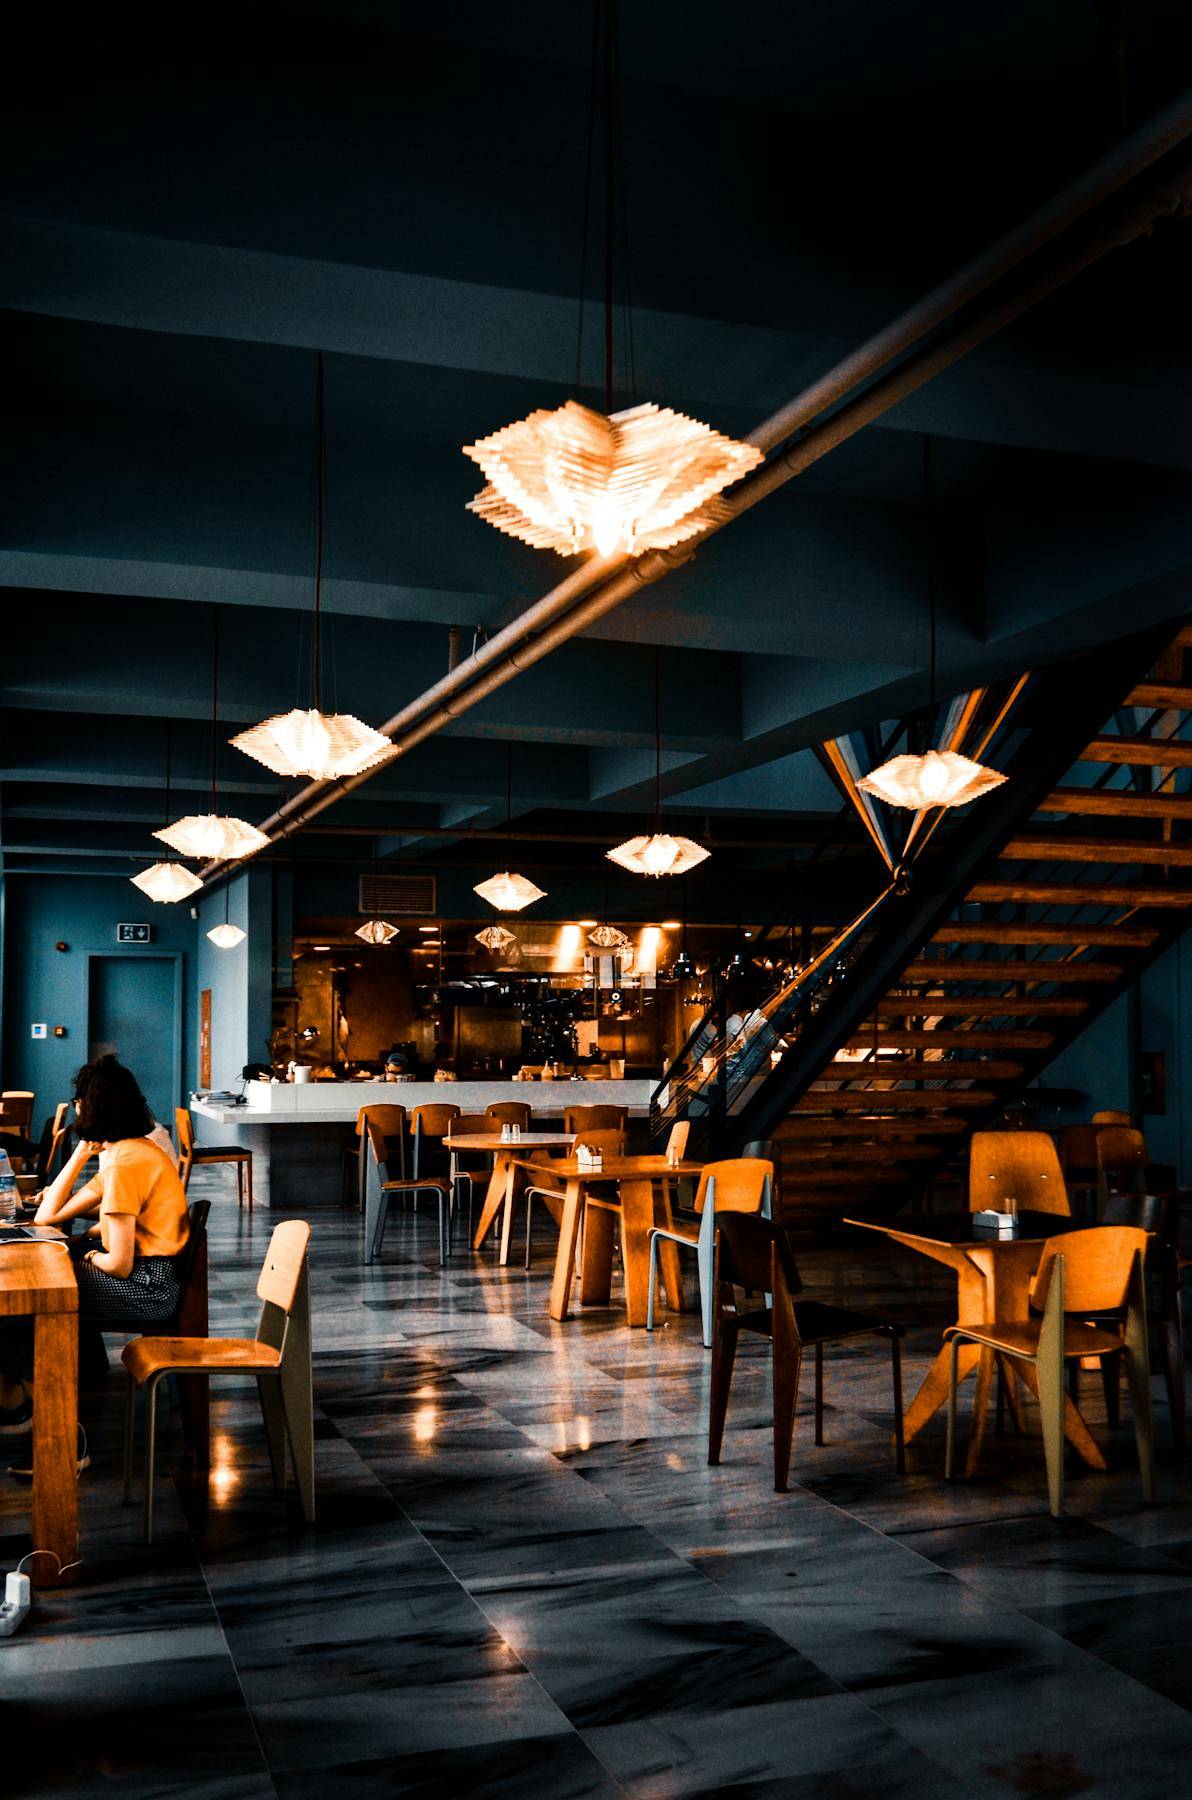 Trendy interior of cafe with creative lamps and wooden furniture with dark painted walls